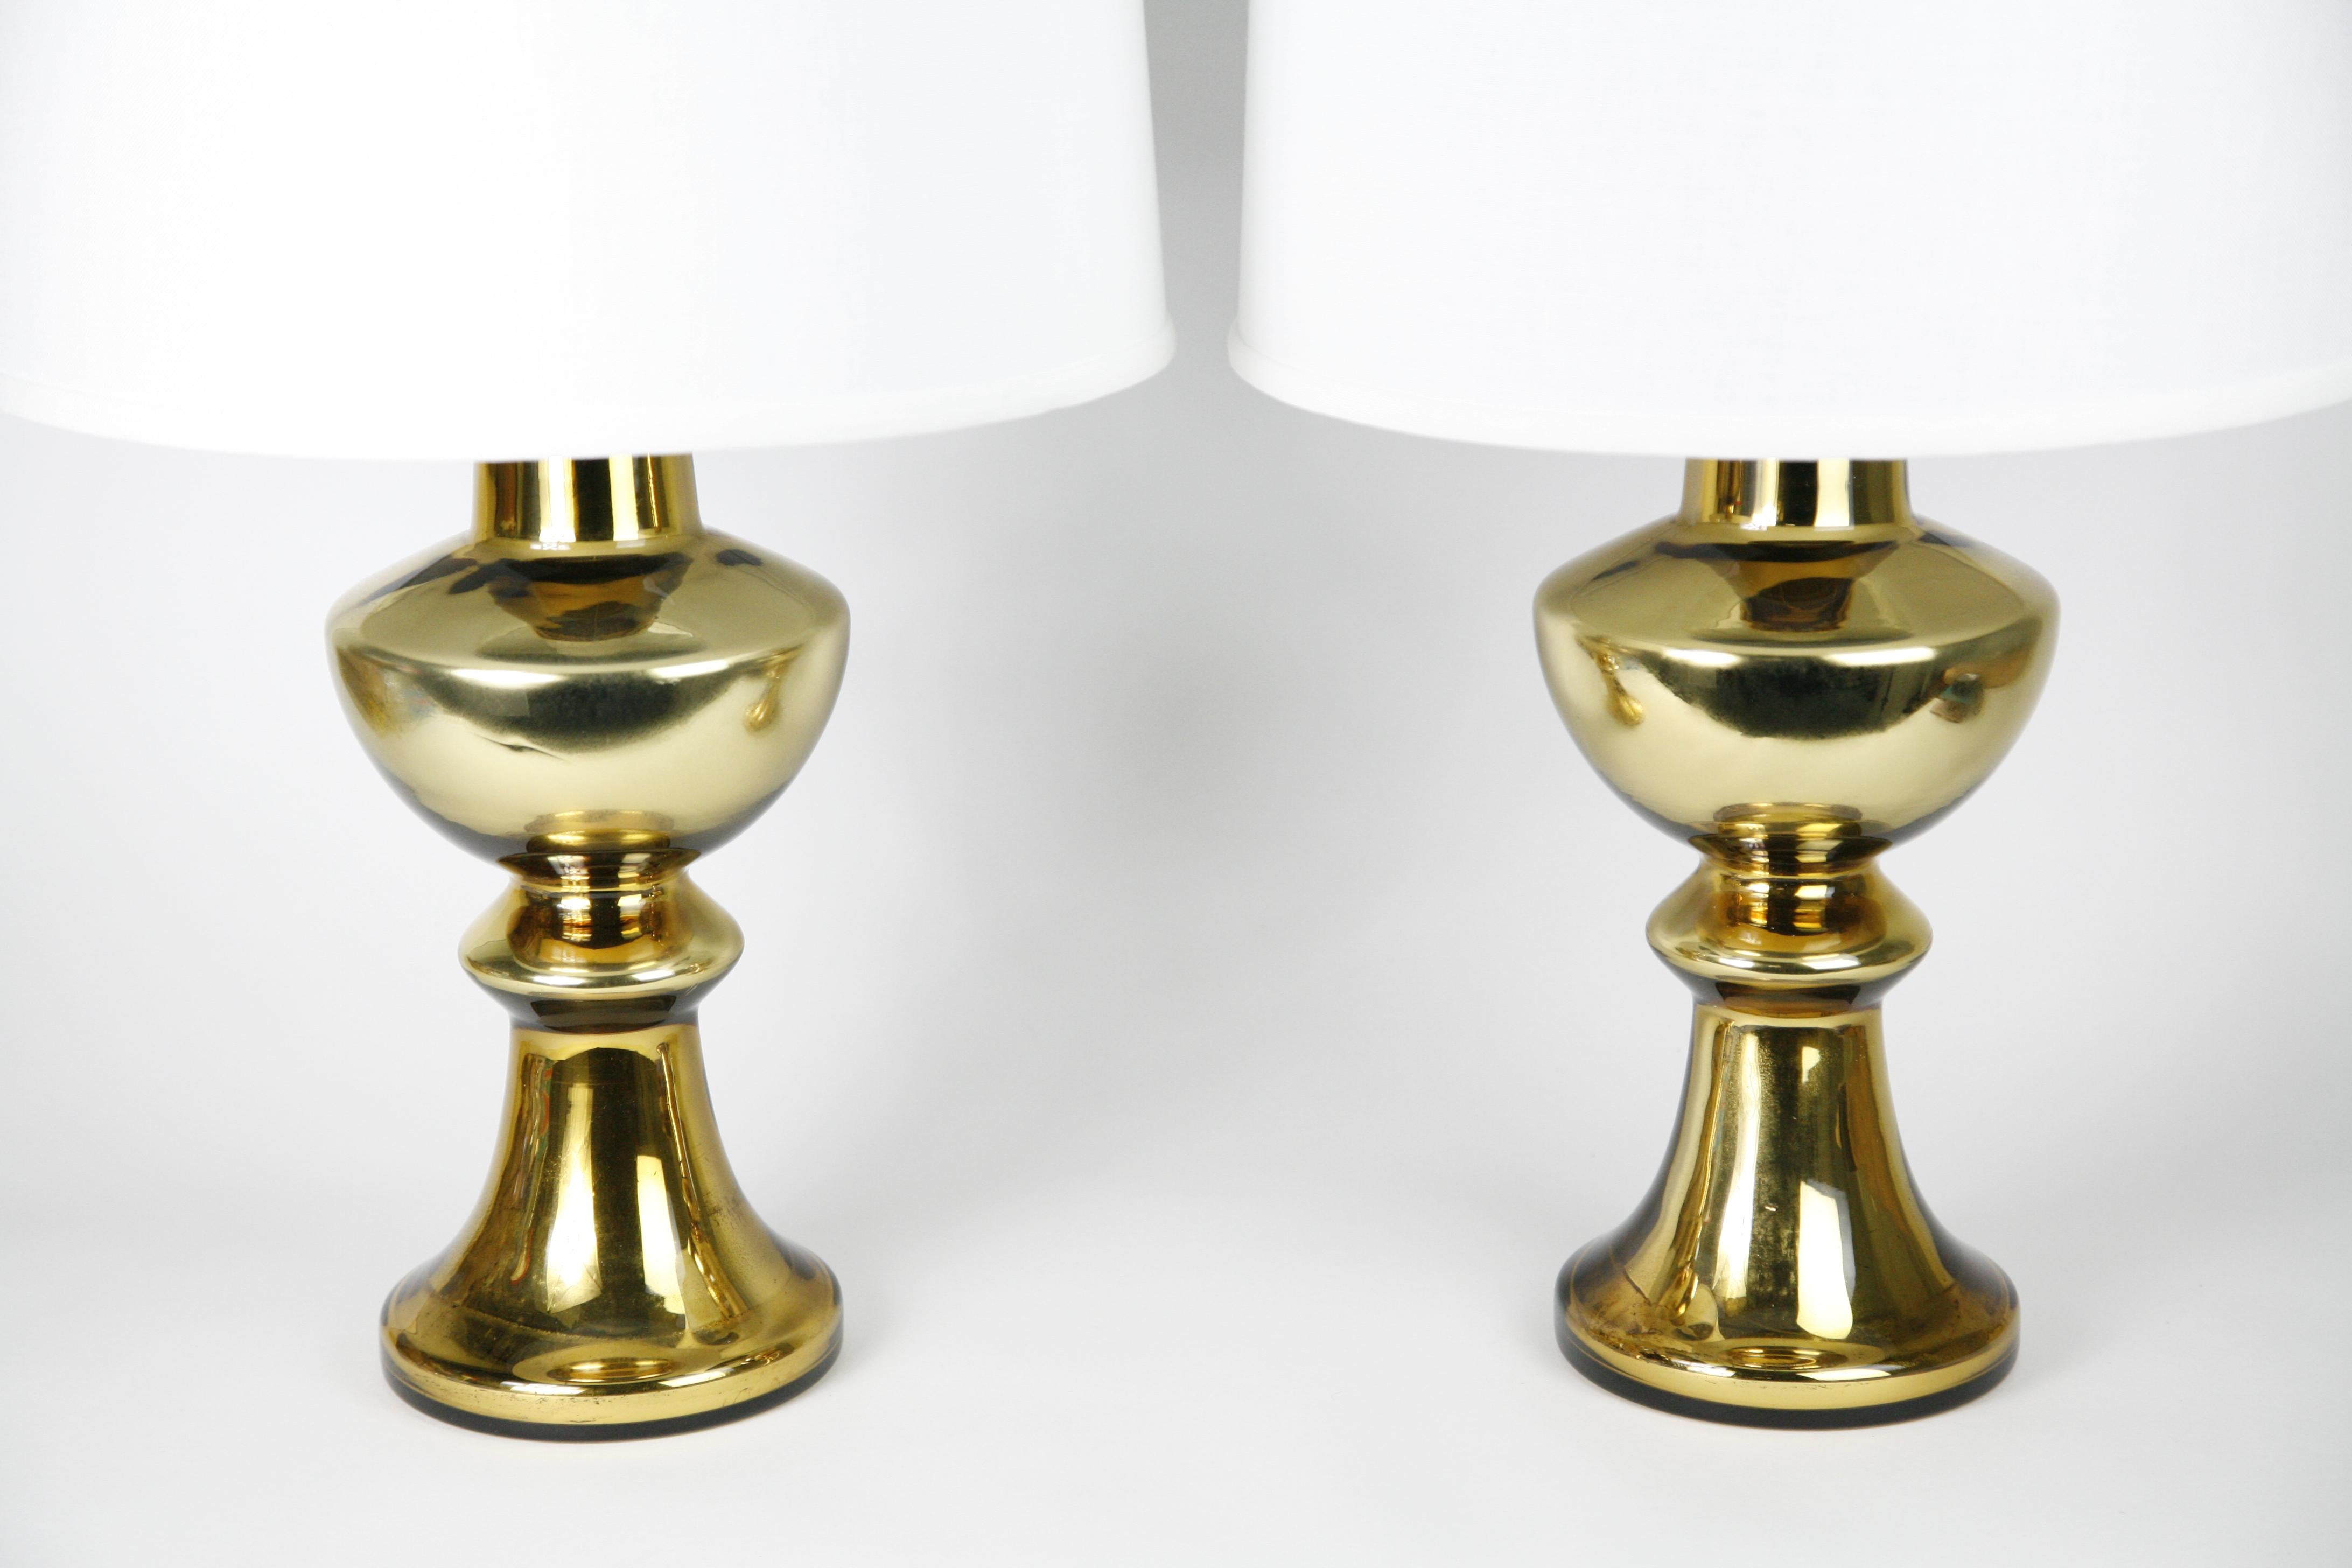 Pair of Gold Glass Encased Lamps with Patina by Flygsfors, Sweden, 1970 For Sale 10